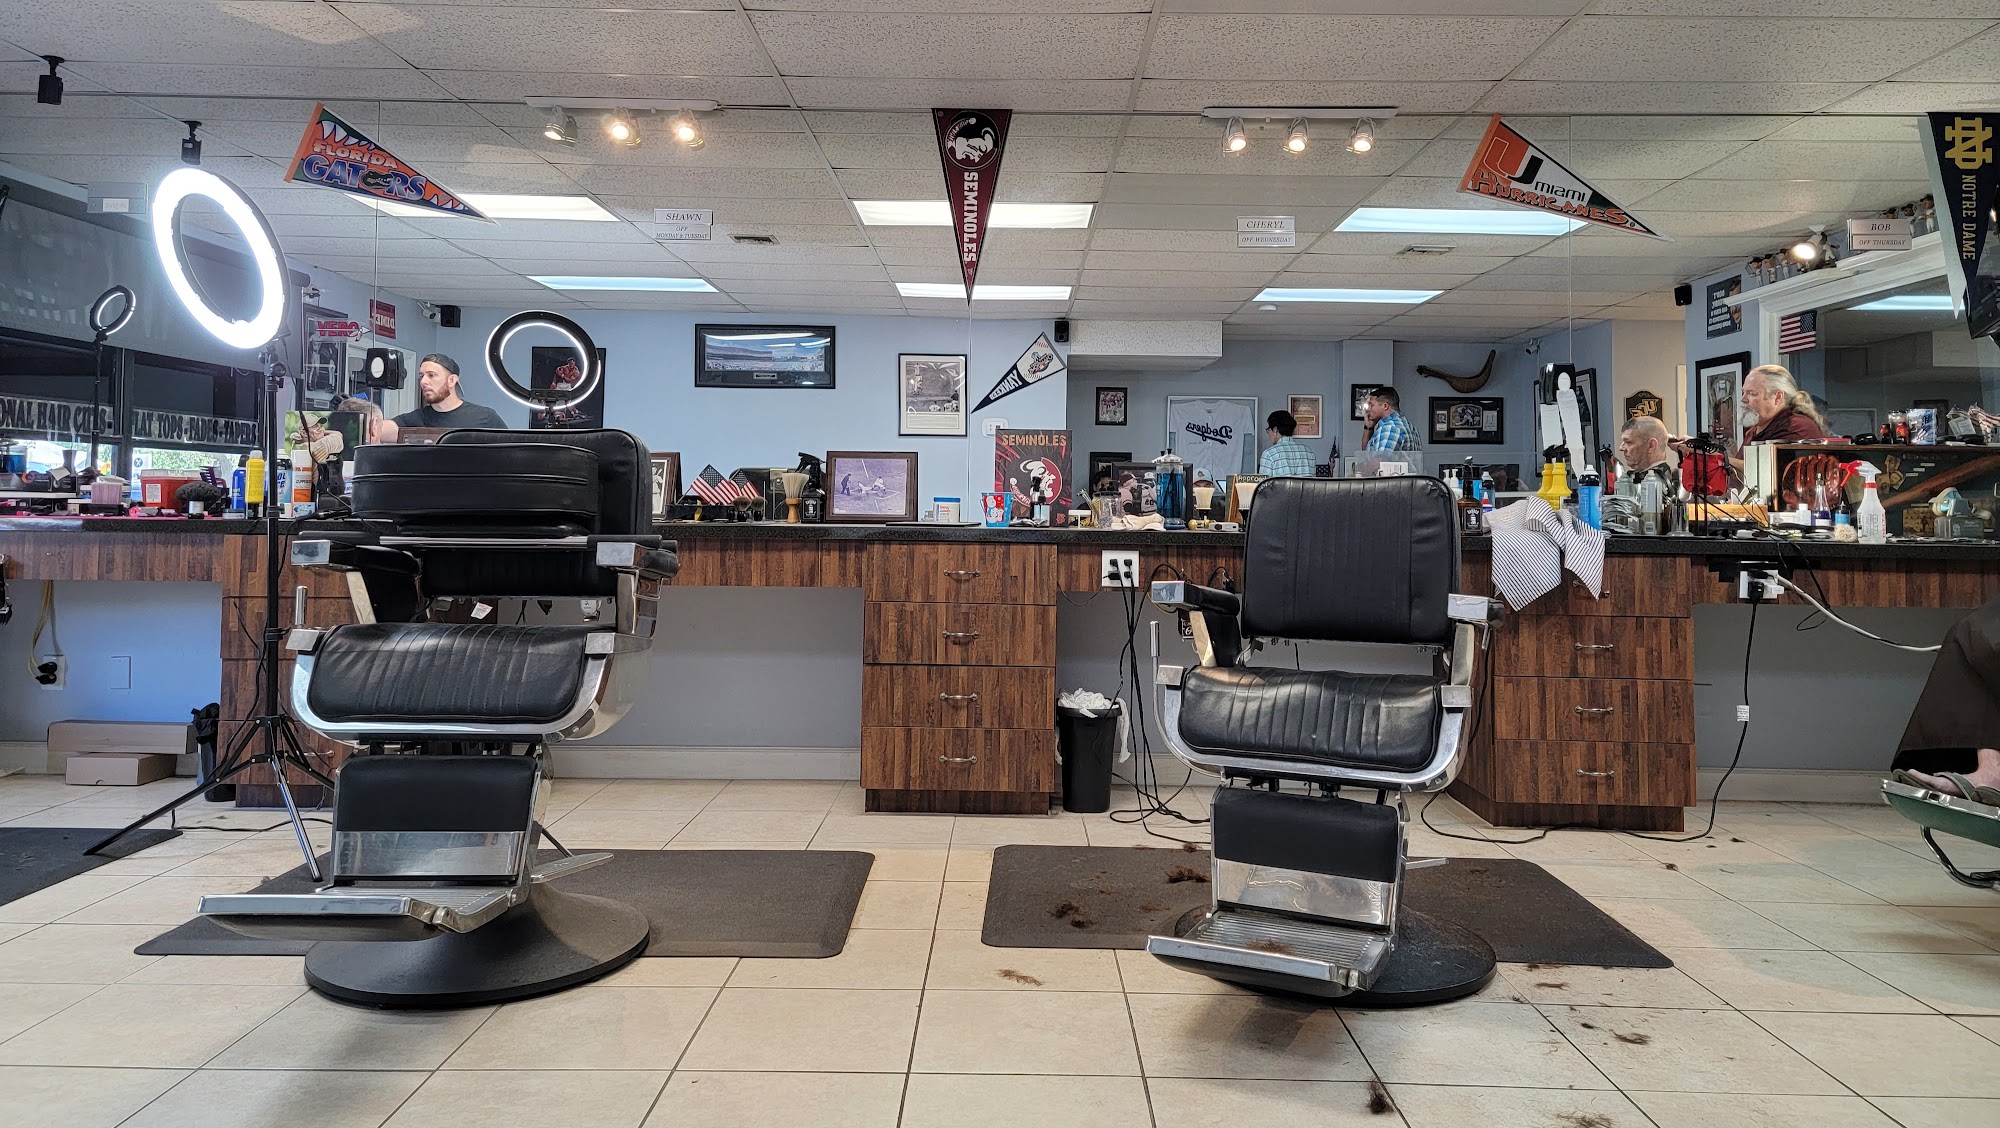 43rd Ave Barbers